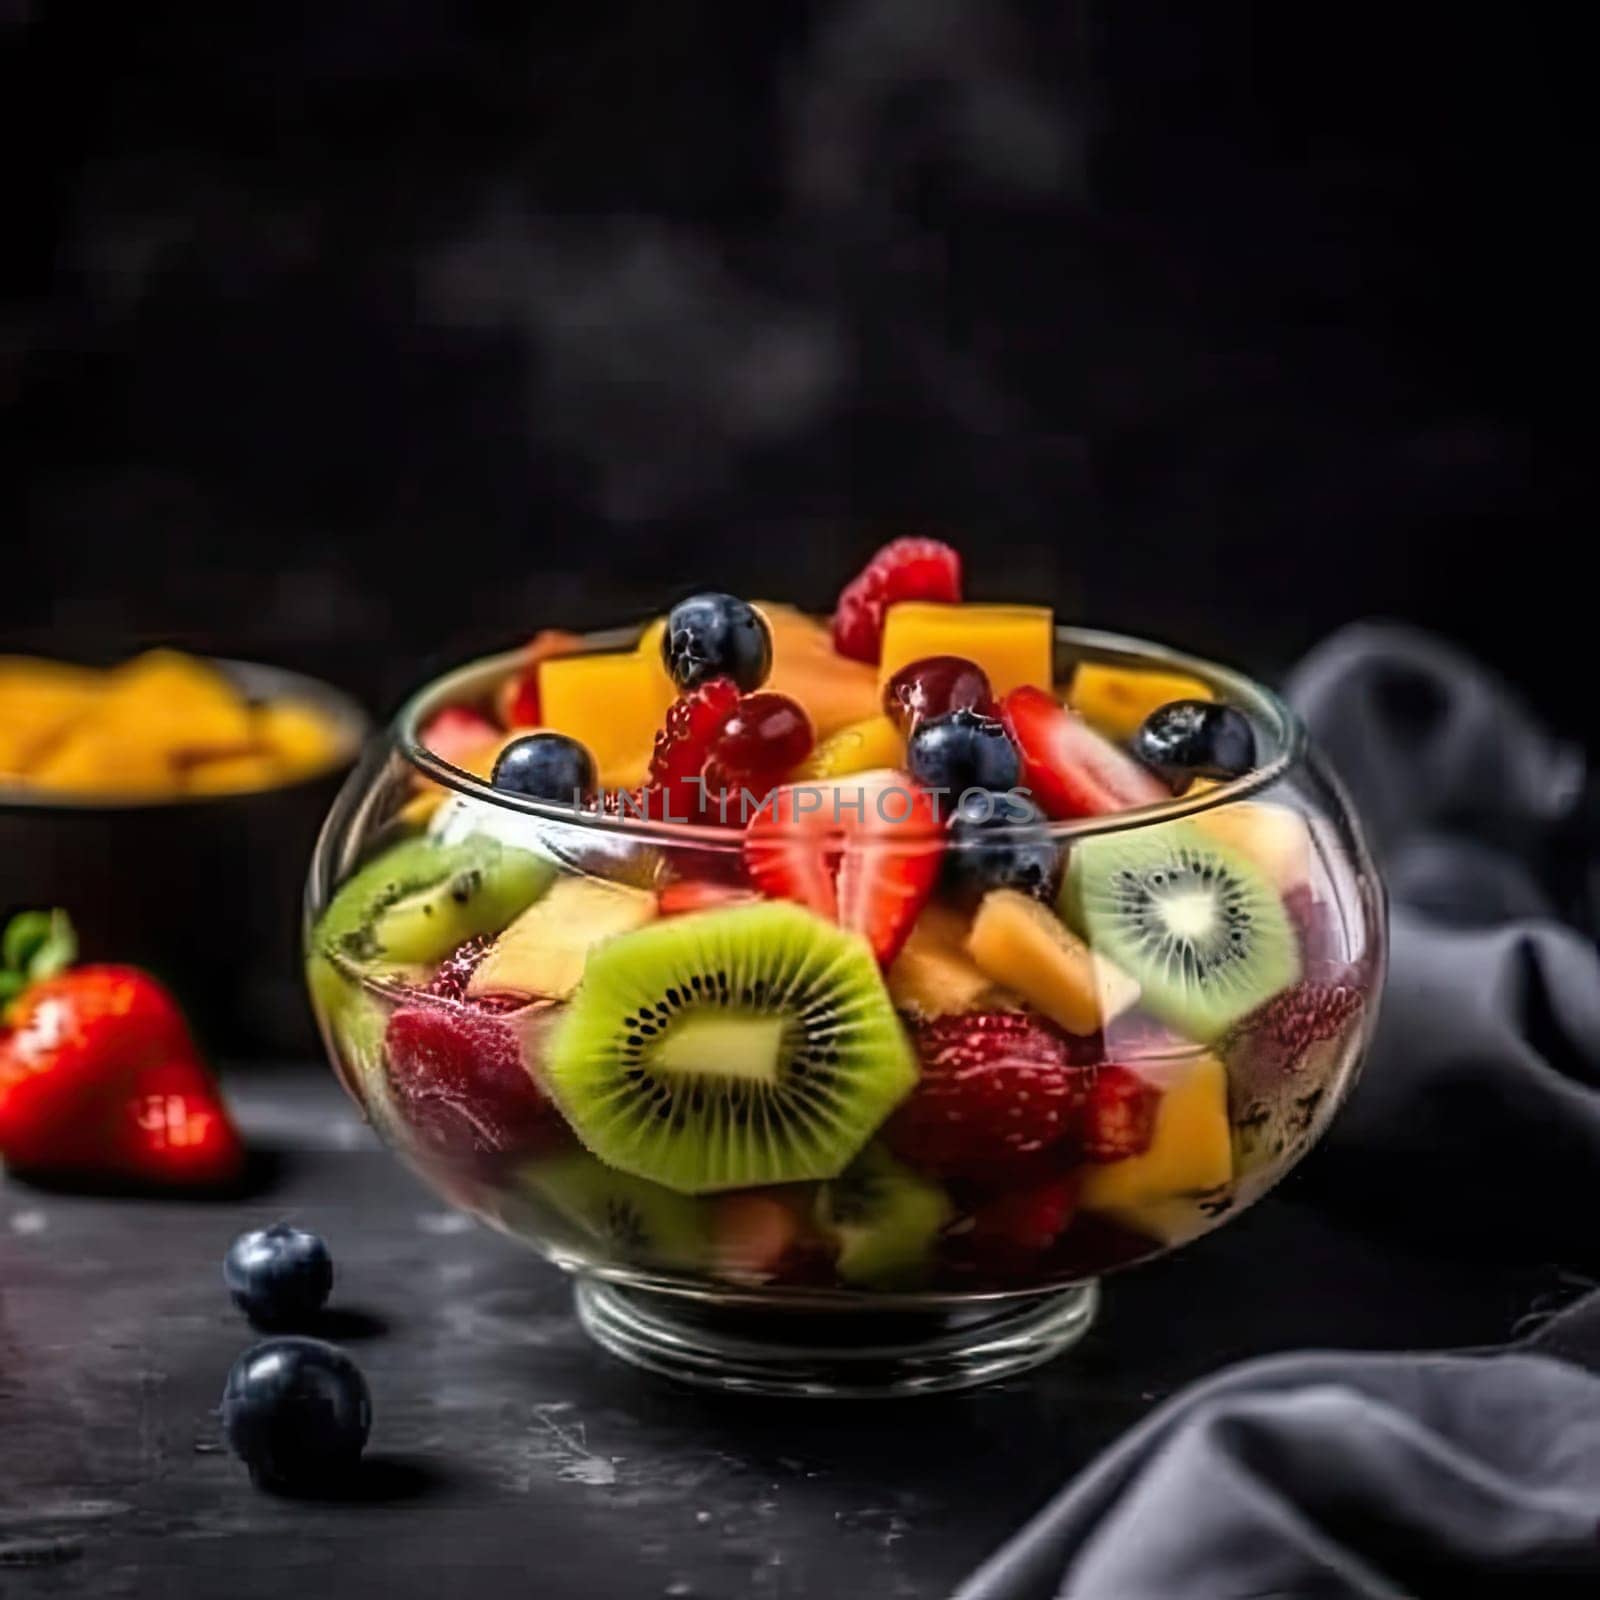 Fruit salad in a glass bowl on a black background, selective focus (ID: 001344)